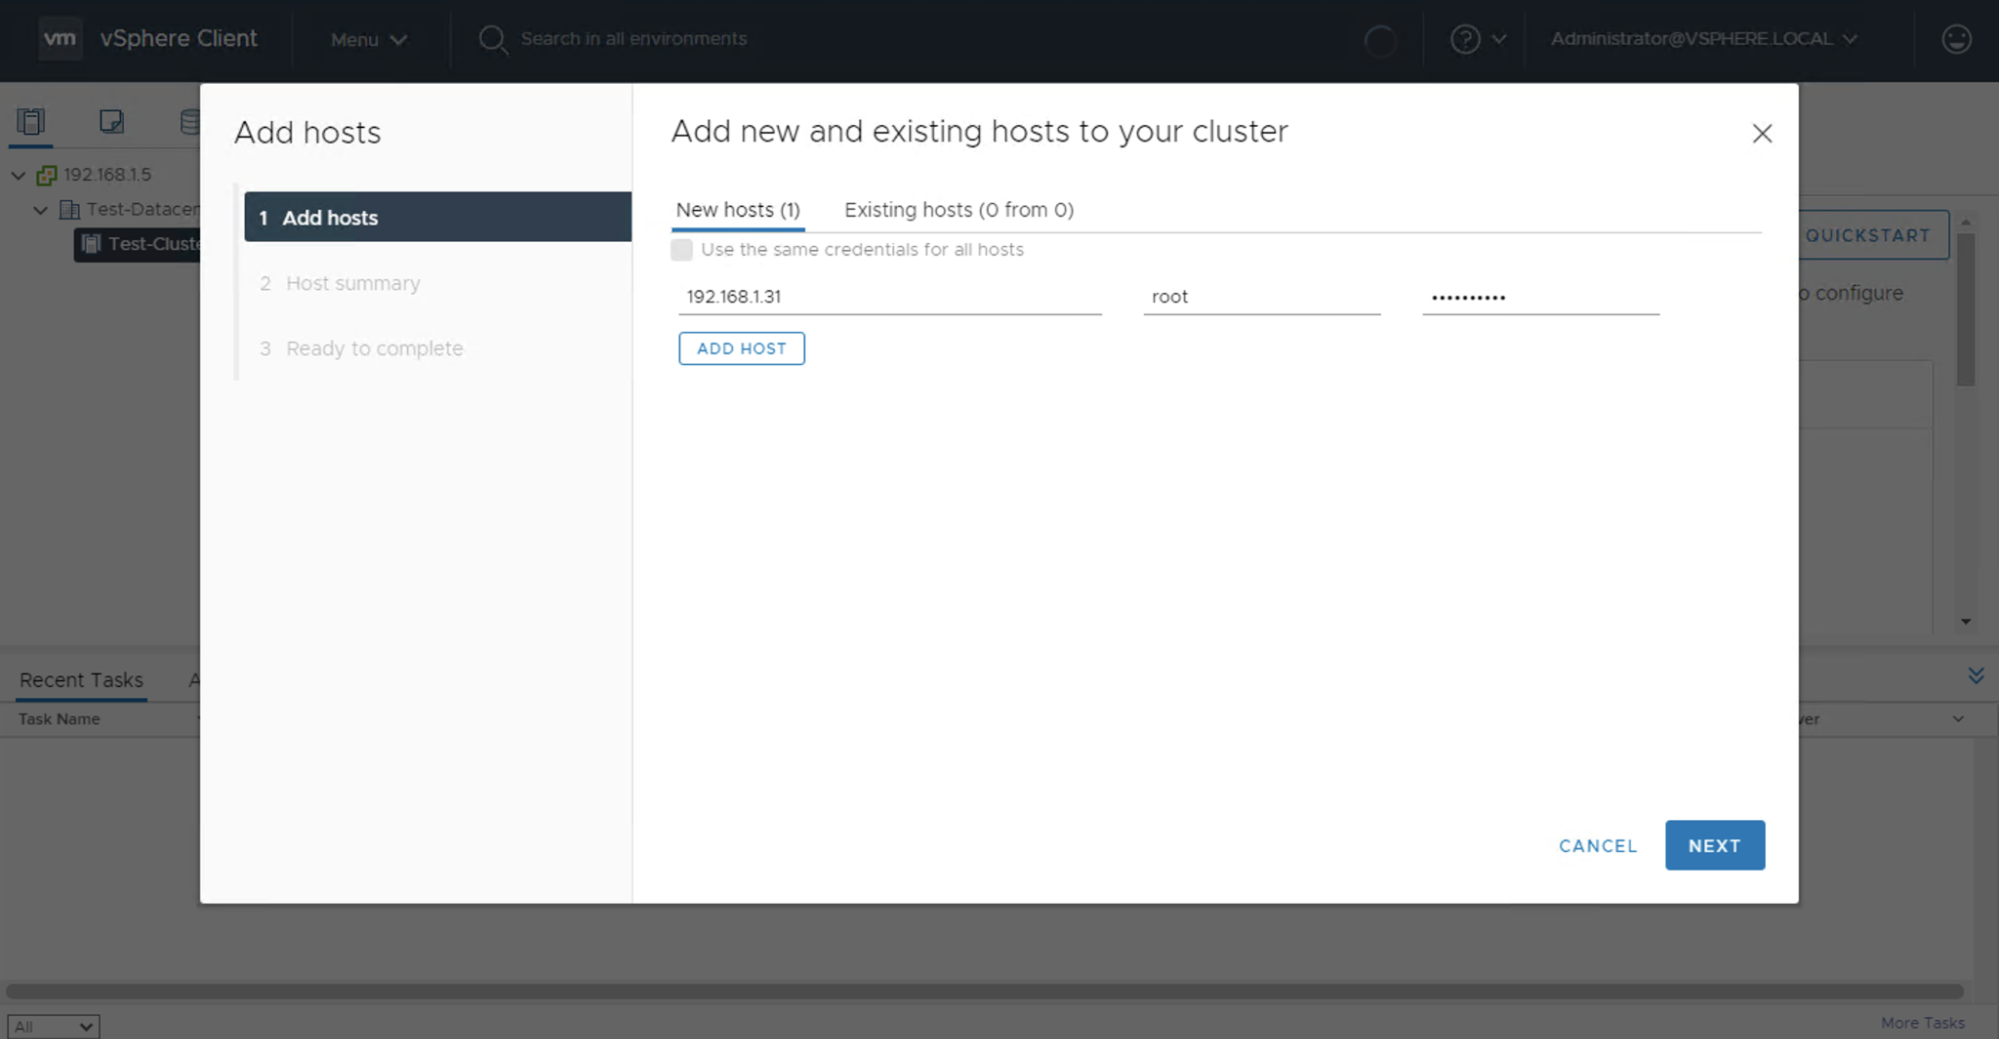 Add New and Existing Hosts to Your Cluster